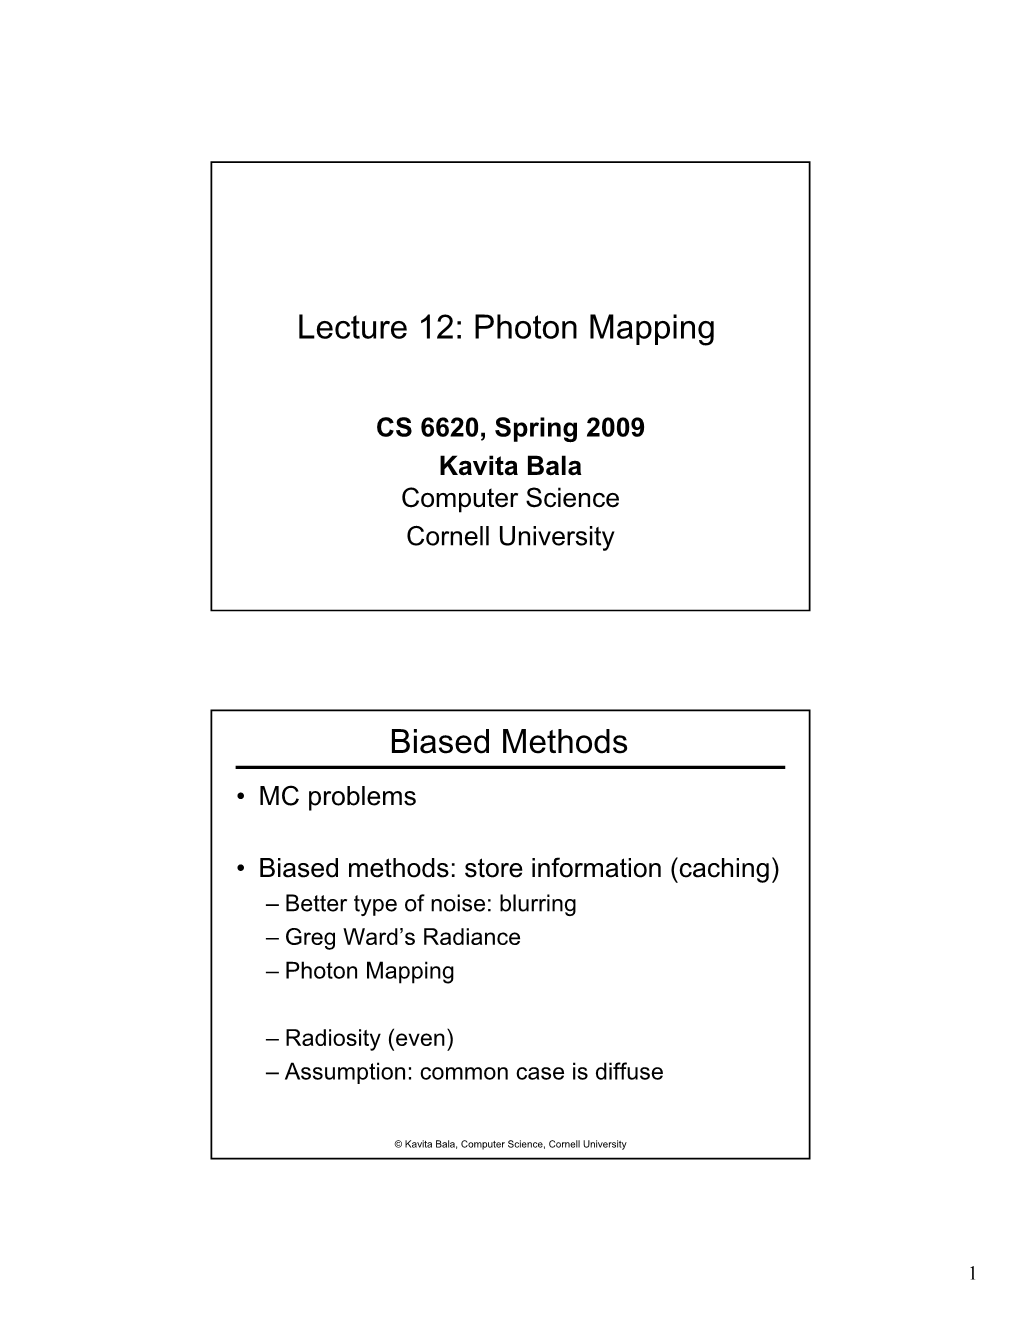 Lecture 12: Photon Mapping Biased Methods